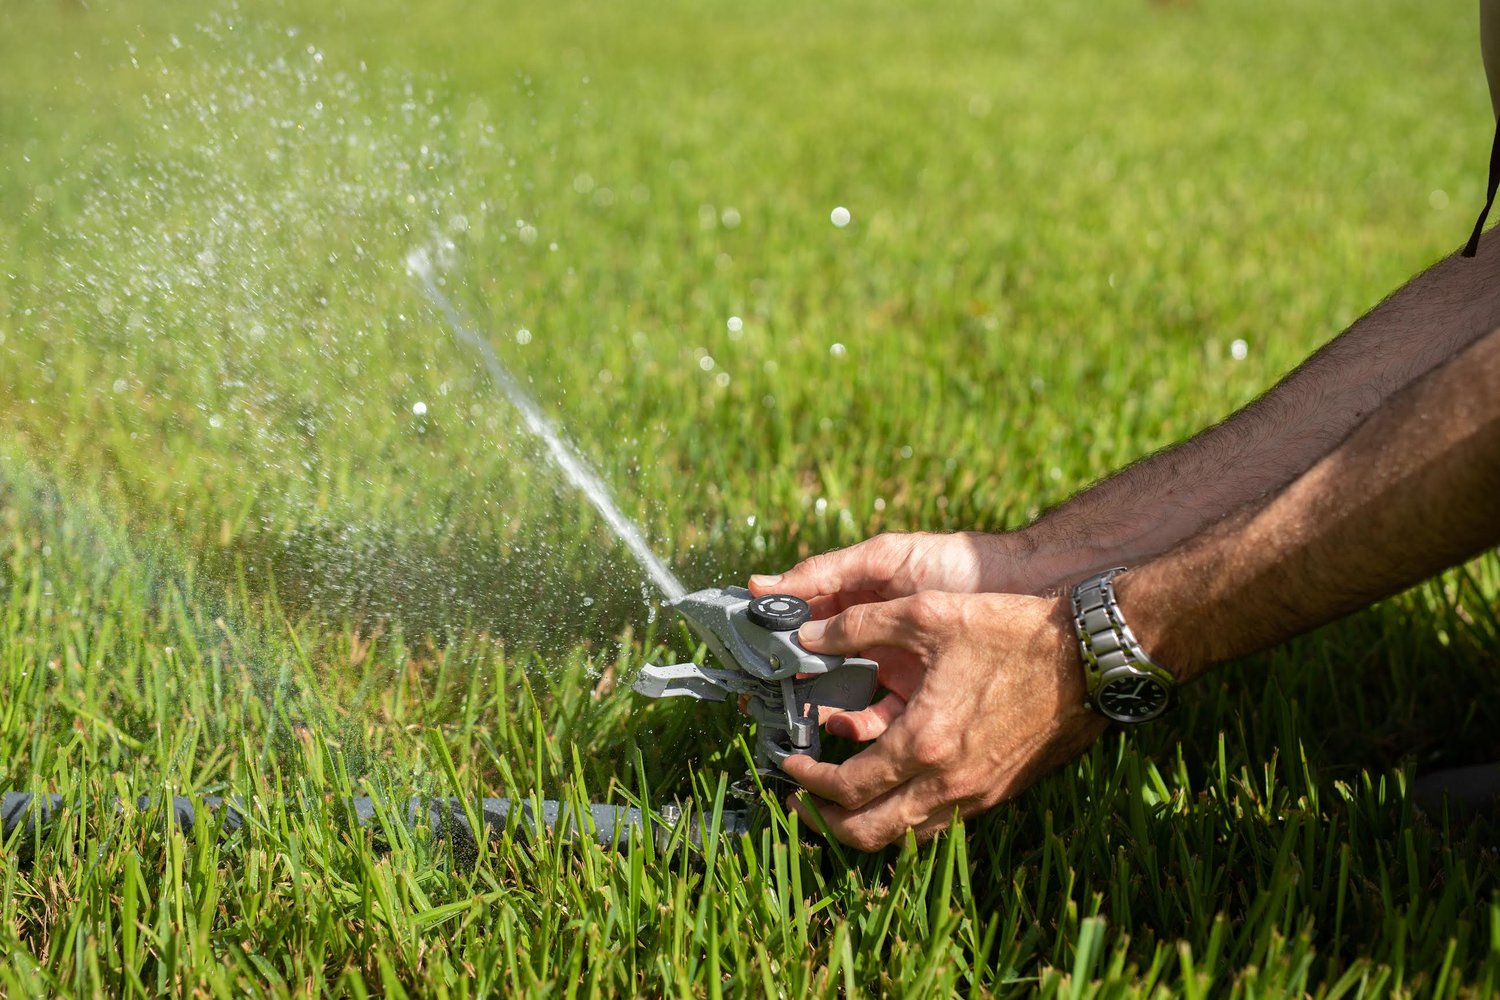 Previous research by UF/IFAS found that the highest water users spend 60 to 70% of their total water use on their yards. Many homes in Florida do not have an irrigation system. For those that do, reducing outdoor water use is the key to making truly impactful steps towards water conservation.